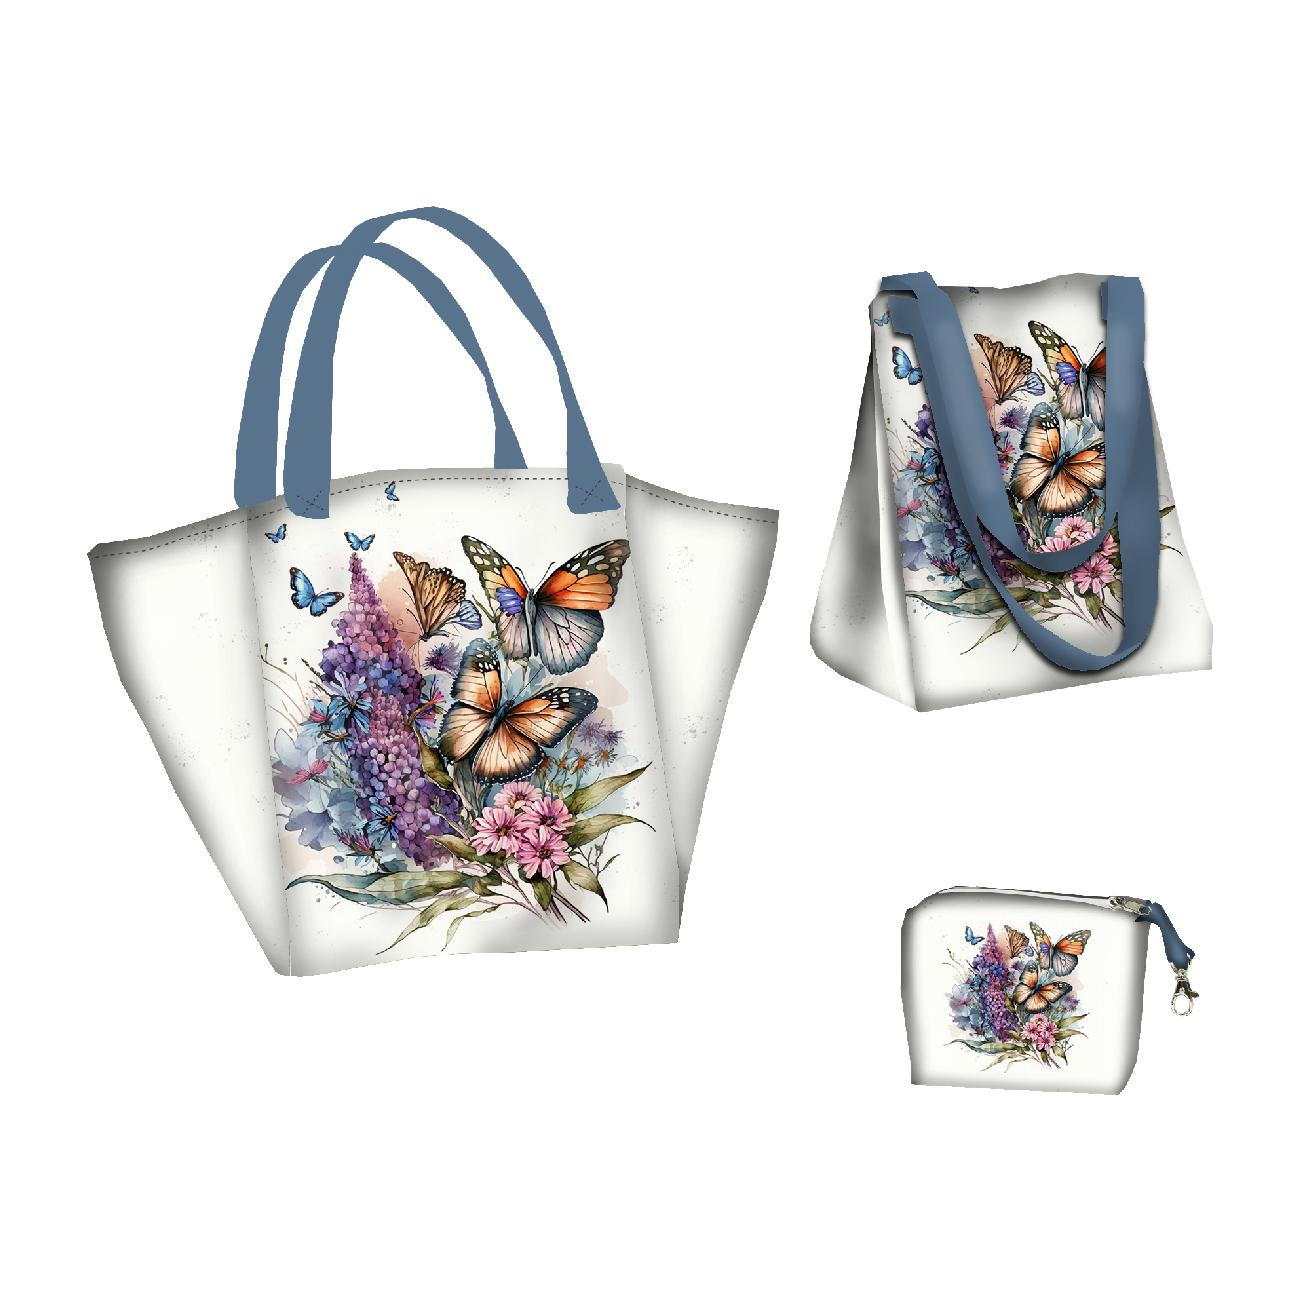 XL bag with in-bag pouch 2 in 1 - BEAUTIFUL BUTTERFLY PAT. 1 - sewing set